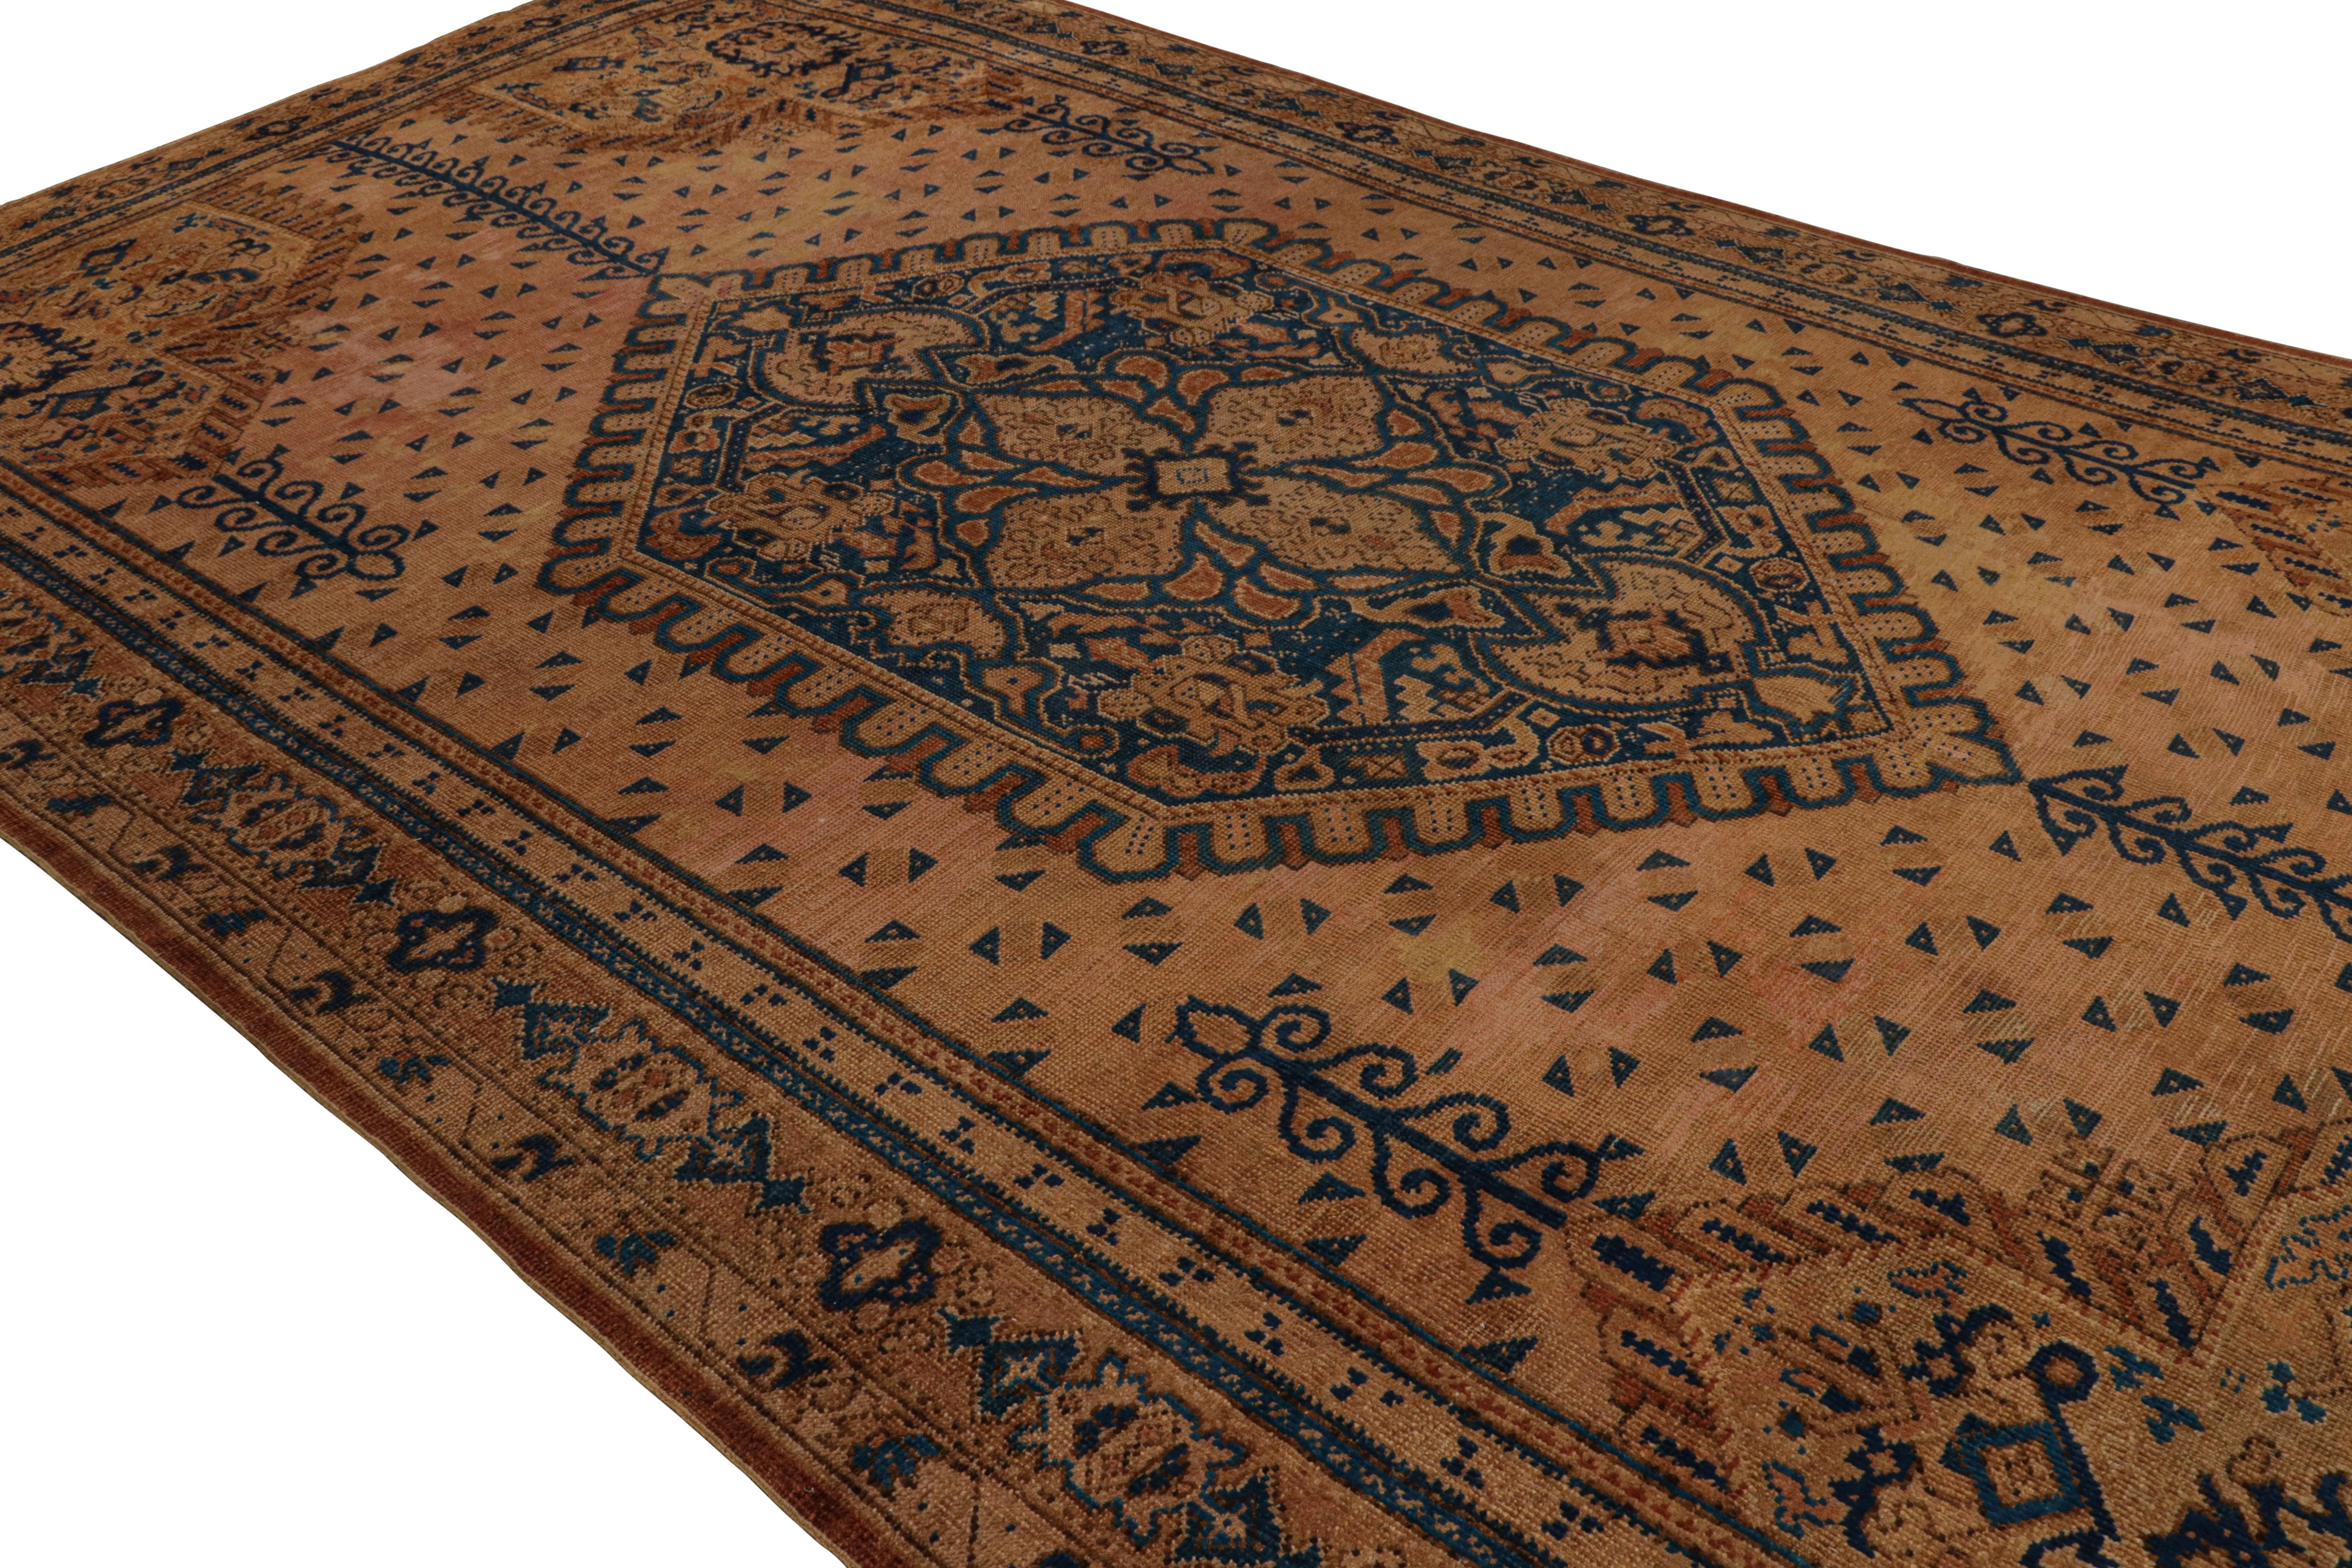 Hand-knotted in wool, this 11x20 oversized Antique European rug features a play of all-over and medallion style, with geometric patterns and a large central floral medallion in navy blue. 

On the Design: 

Admirers of the craft may note this